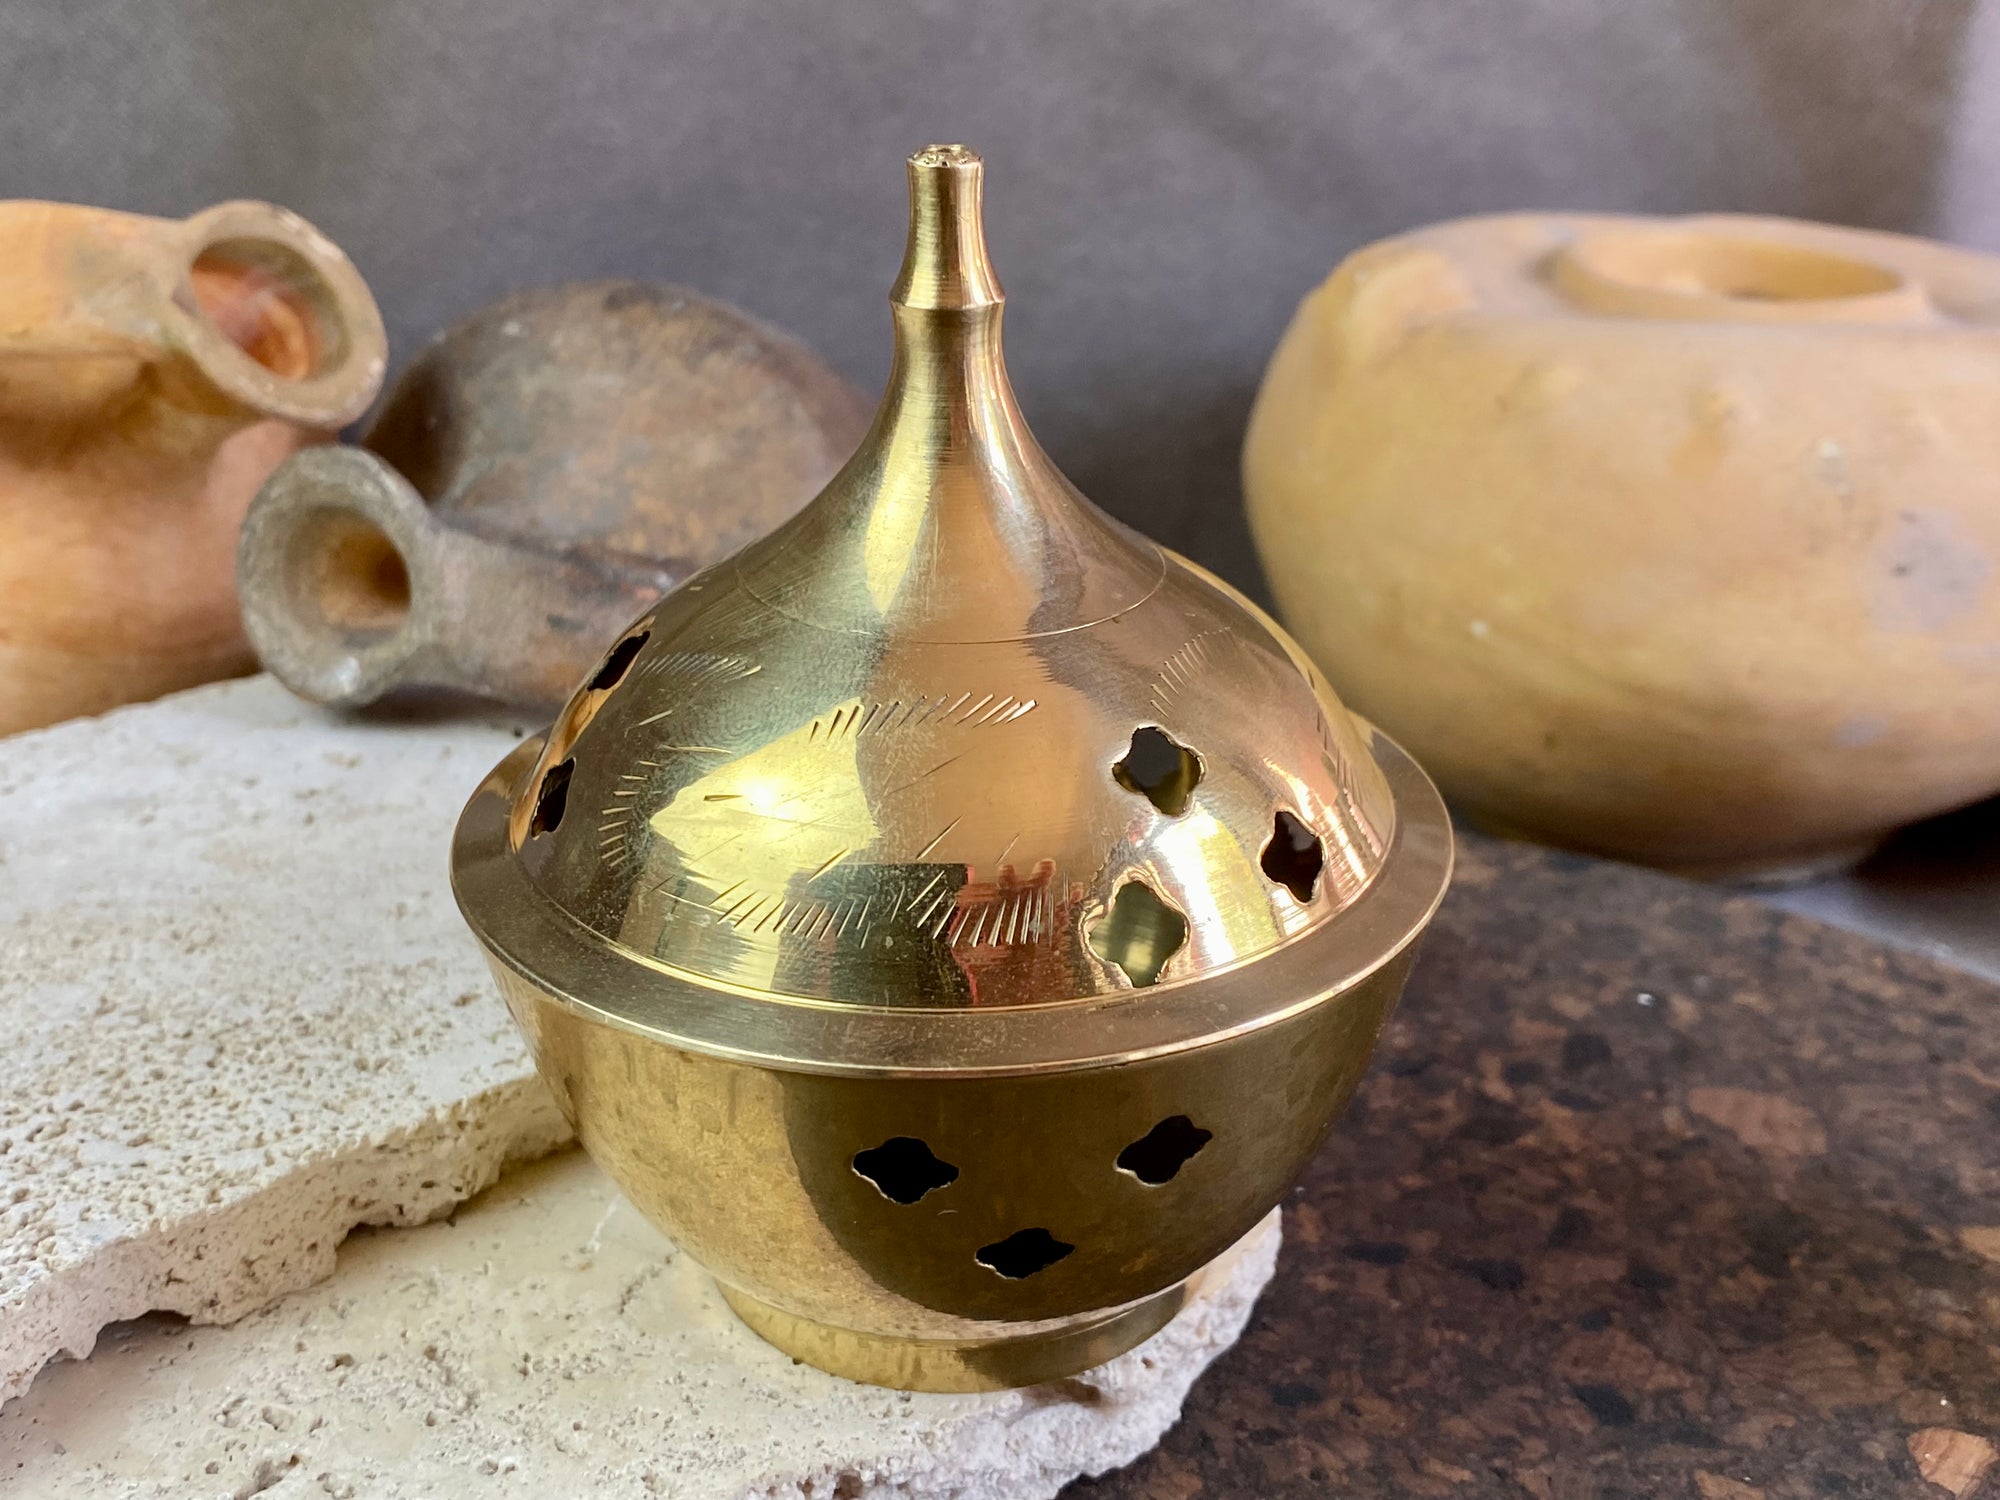 Made from quality solid brass, our compact incense burner takes a standard charcoal disk for burning incense, resin, essential oils and scented powders.  Height 9.5 cm, diameter 8 cm